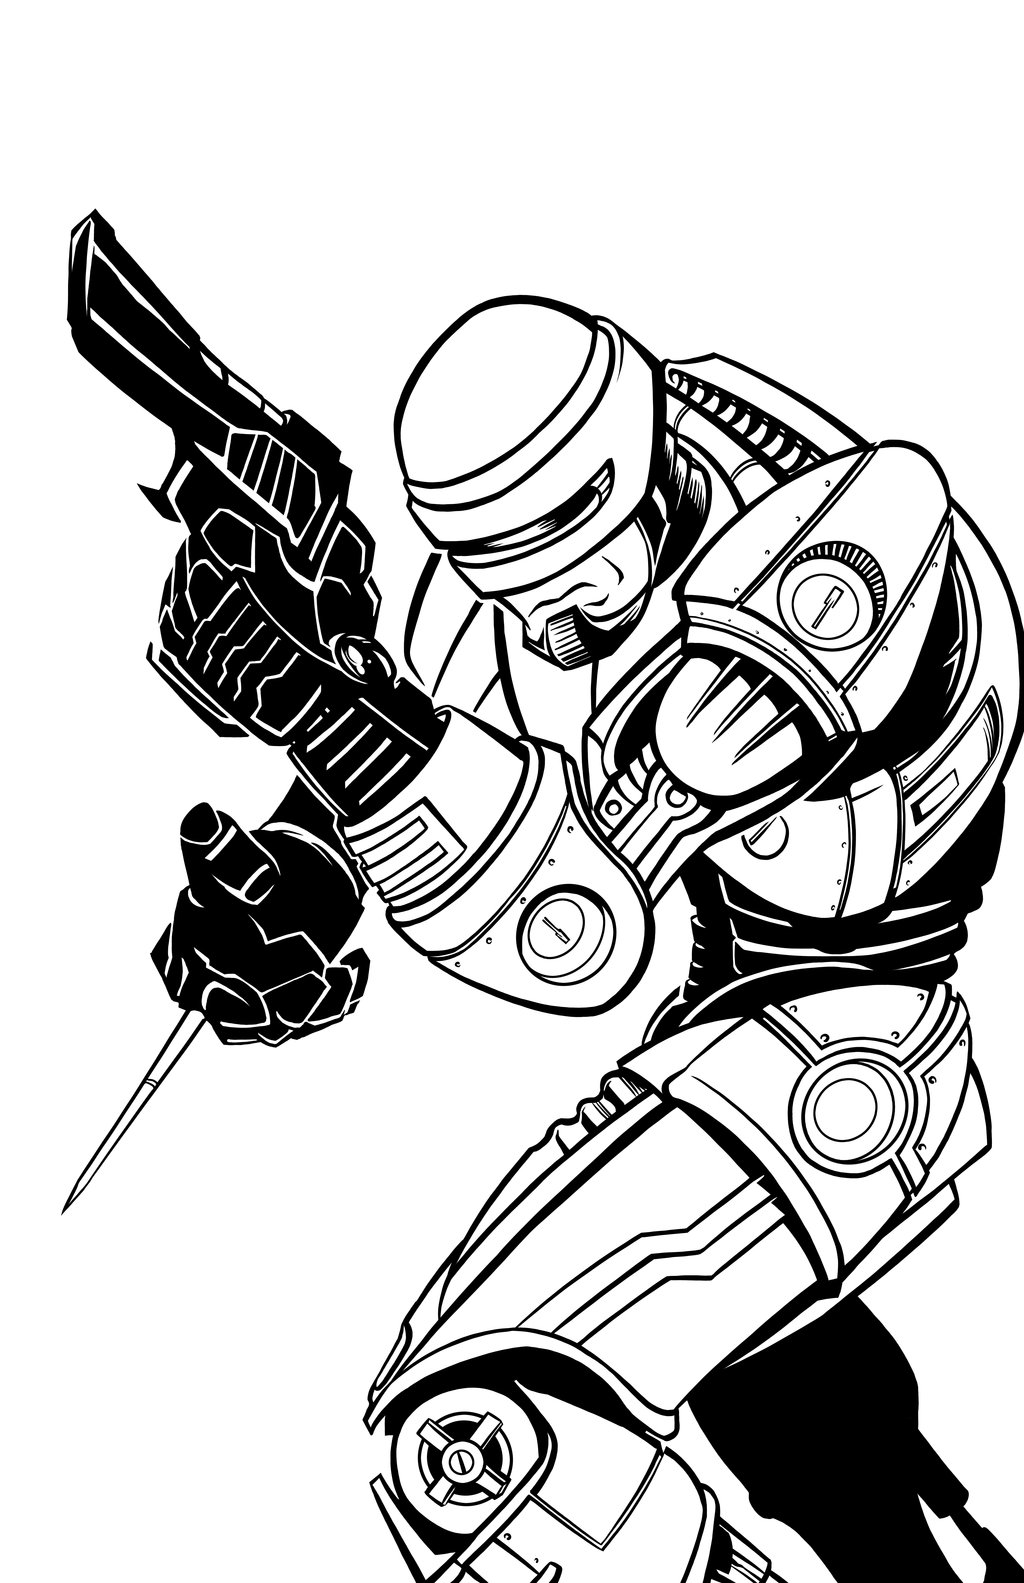 Free Robocop coloring page - free printable coloring pages on coloori.com